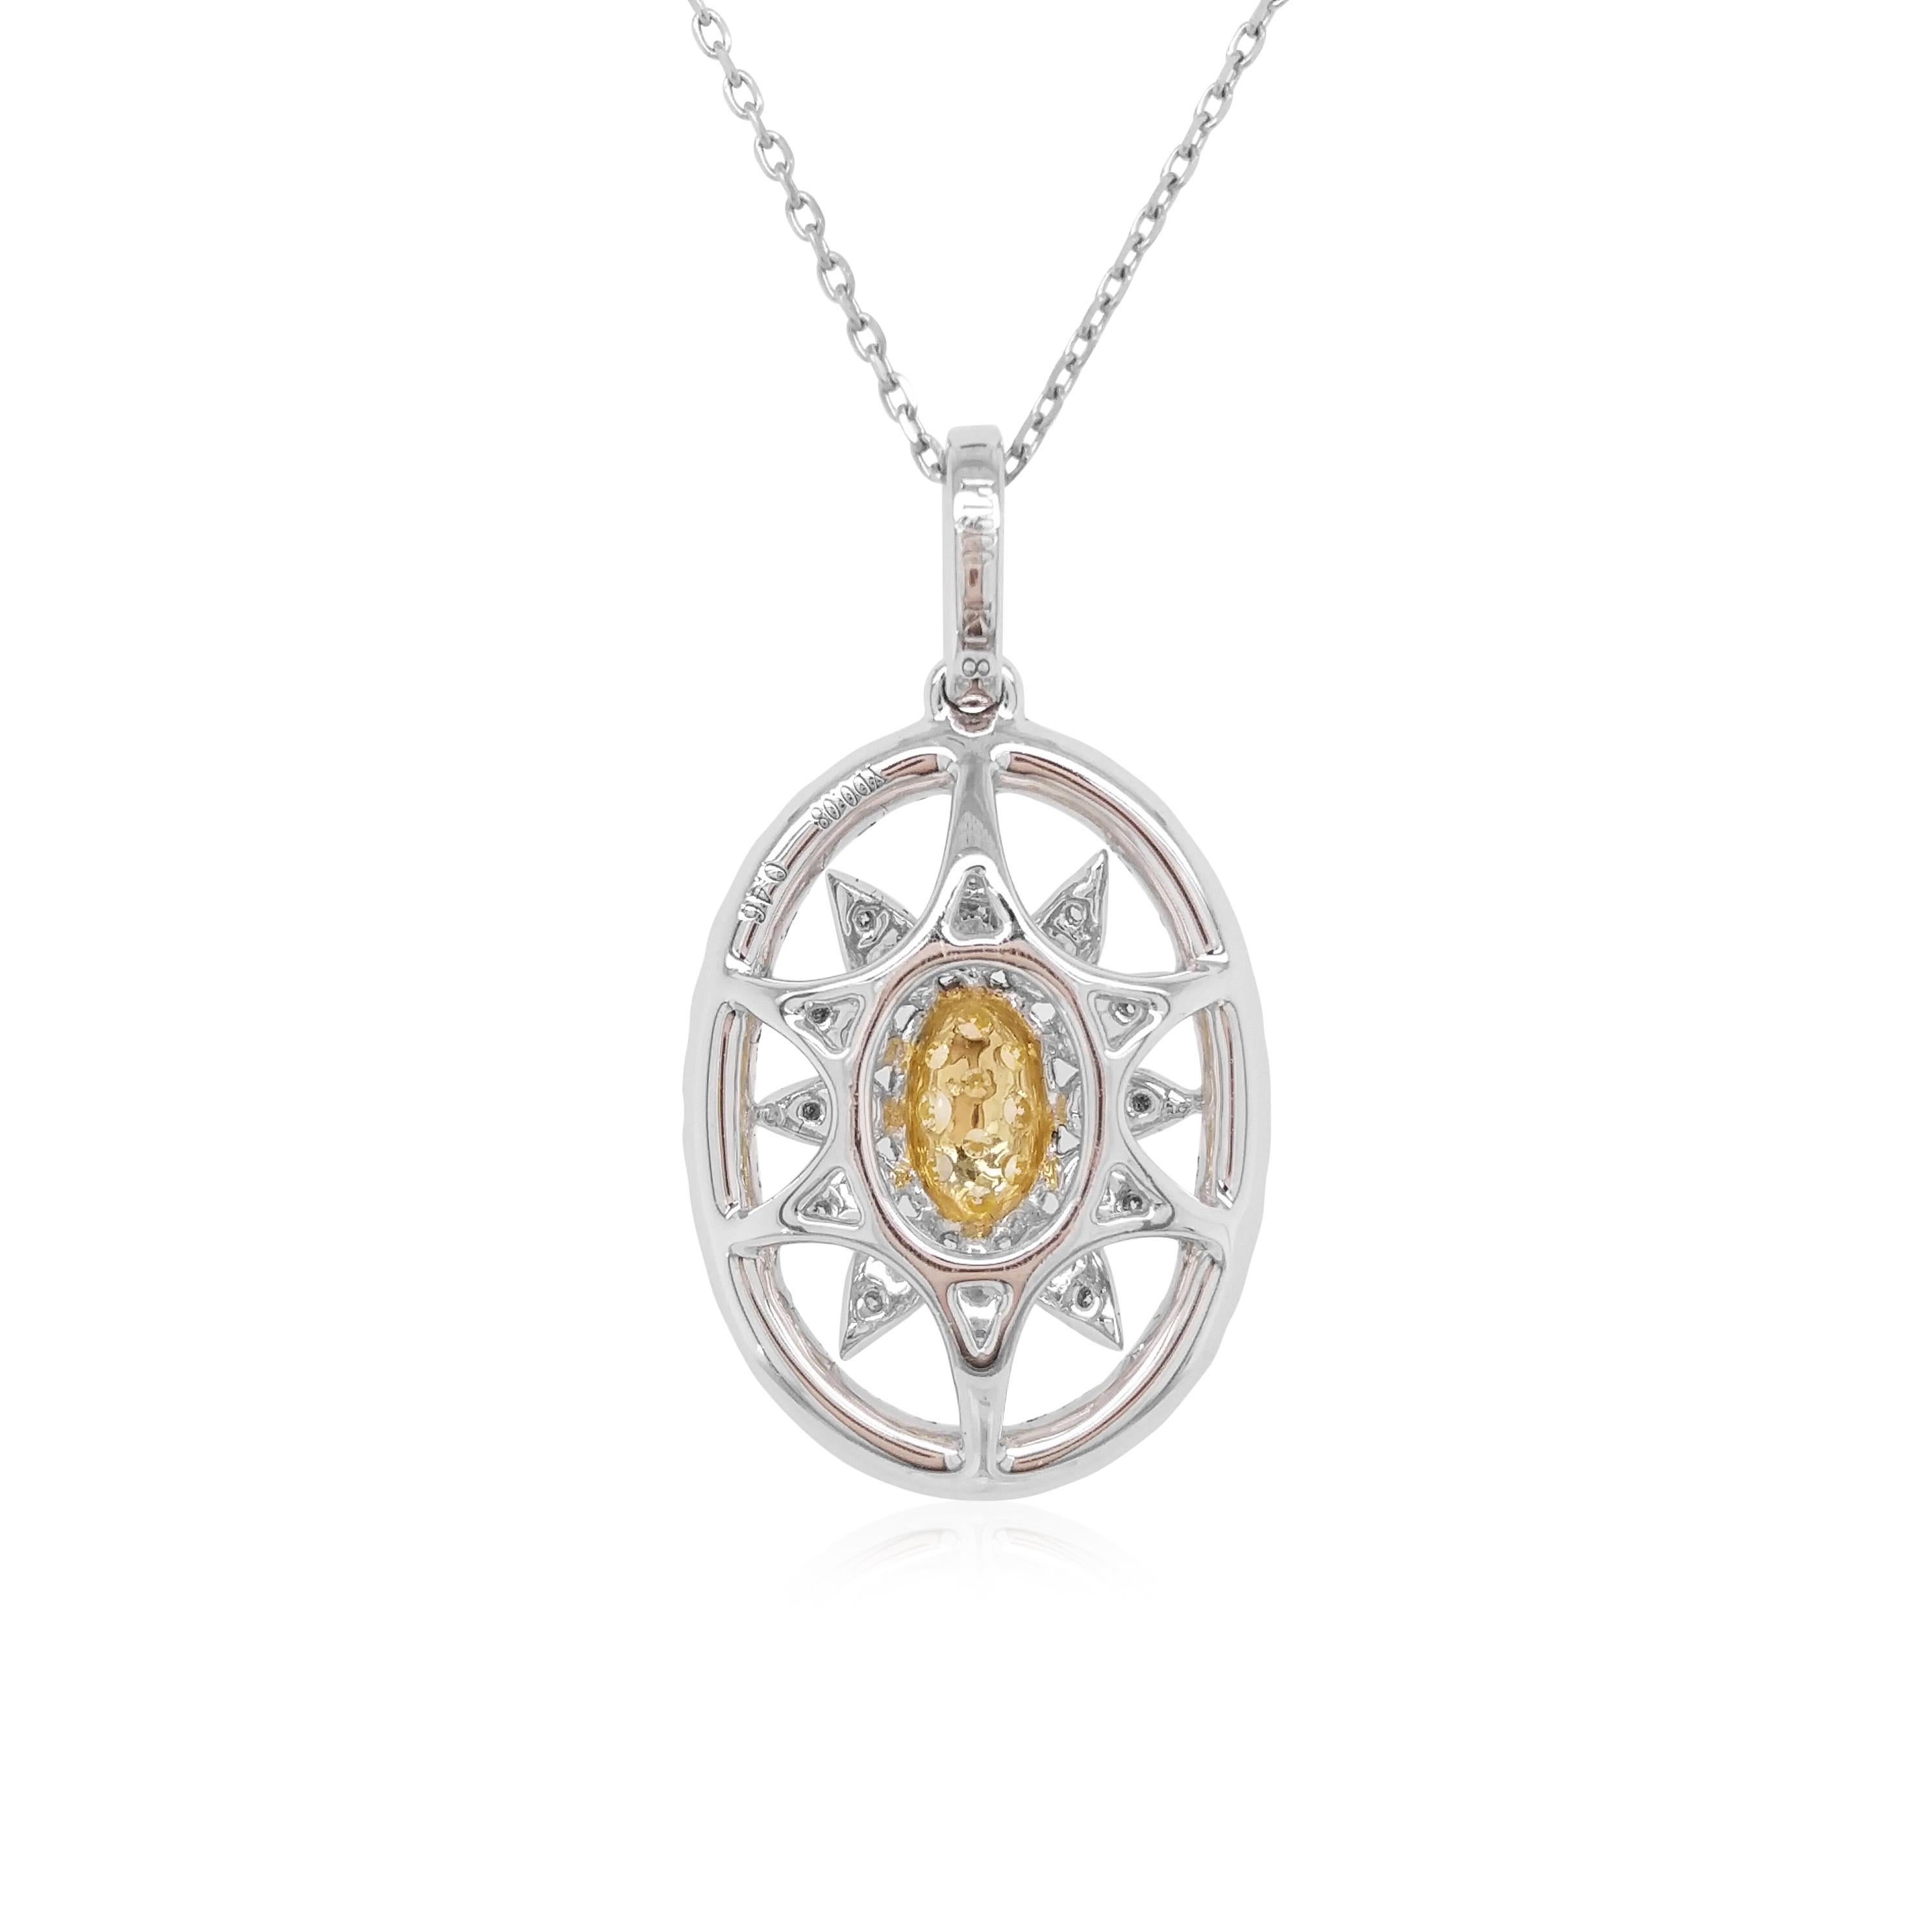 This unique pendant features striking natural Yellow diamonds at its centre, surrounded by a bold pattern scintillating white diamonds. The perfect piece to take you from day to night, this pendant will elevate any outfit - especially when paired